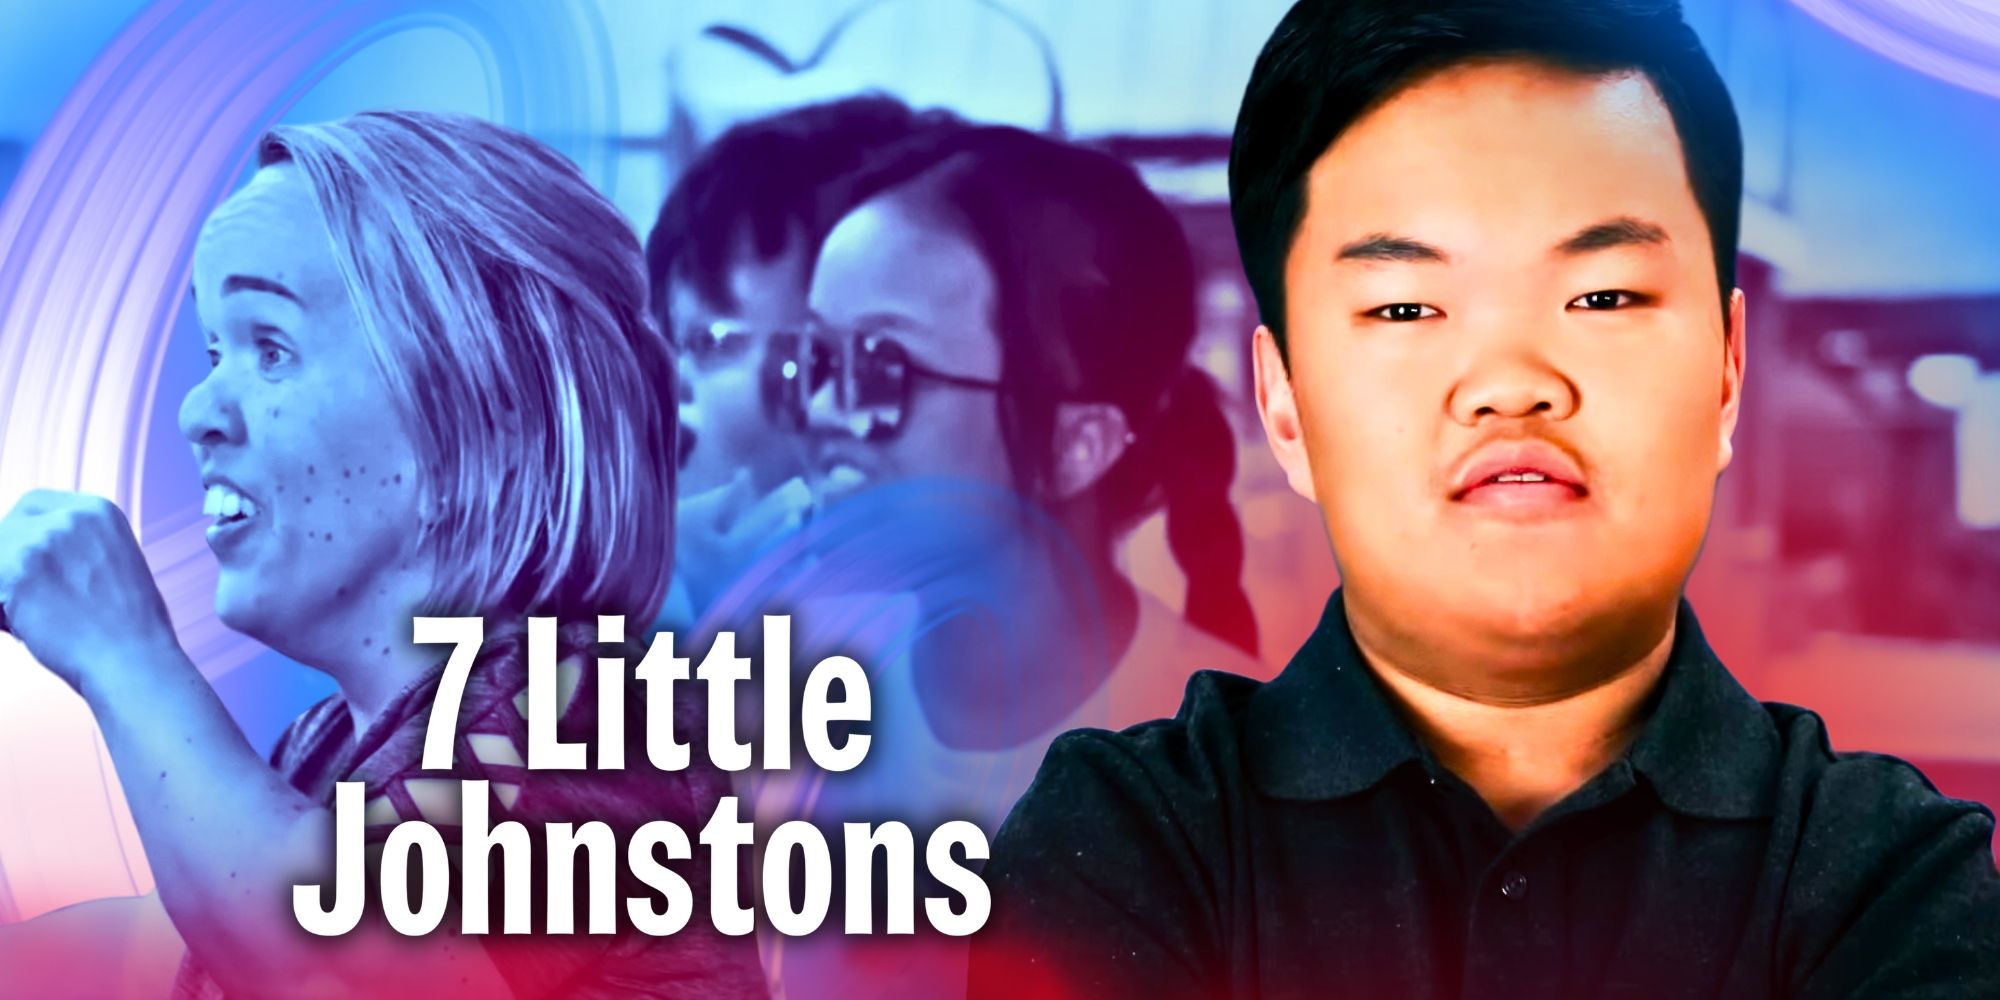 How To Watch 7 Little Johnstons Season 14 & When It Premieres